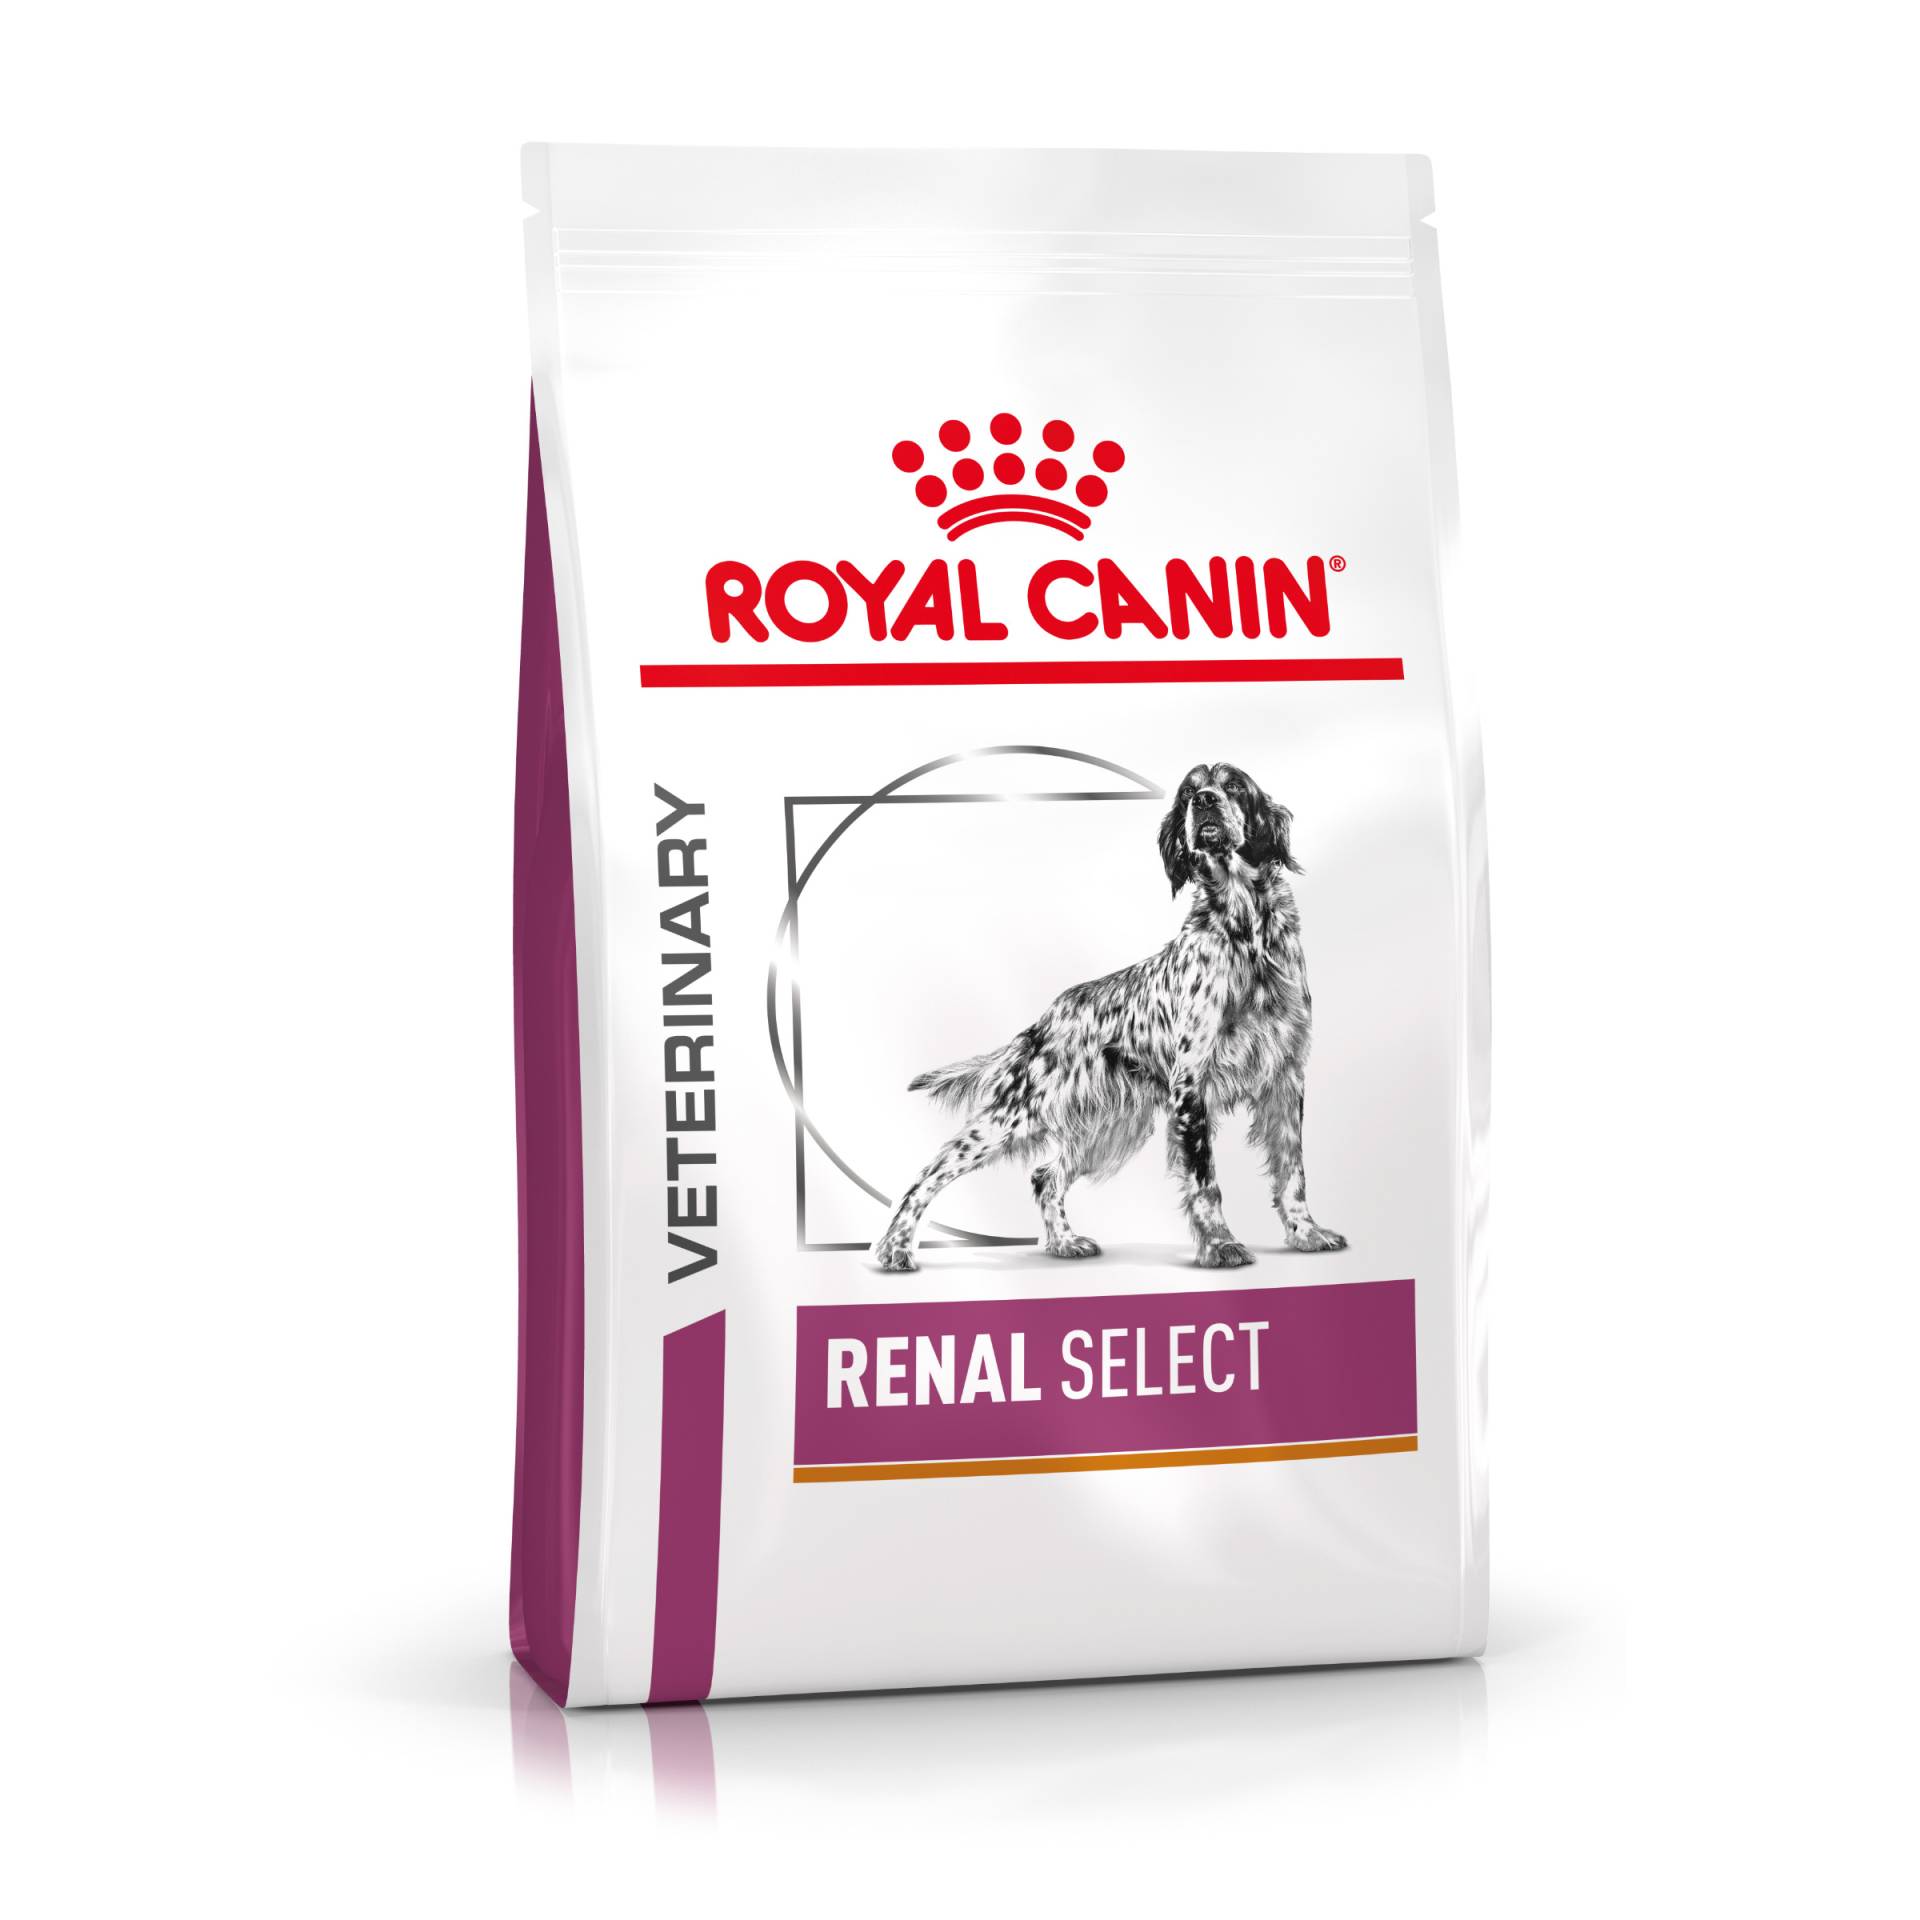 Royal Canin Veterinary Canine Renal Select -  Sparpaket: 2 x 10 kg von Royal Canin Veterinary Diet